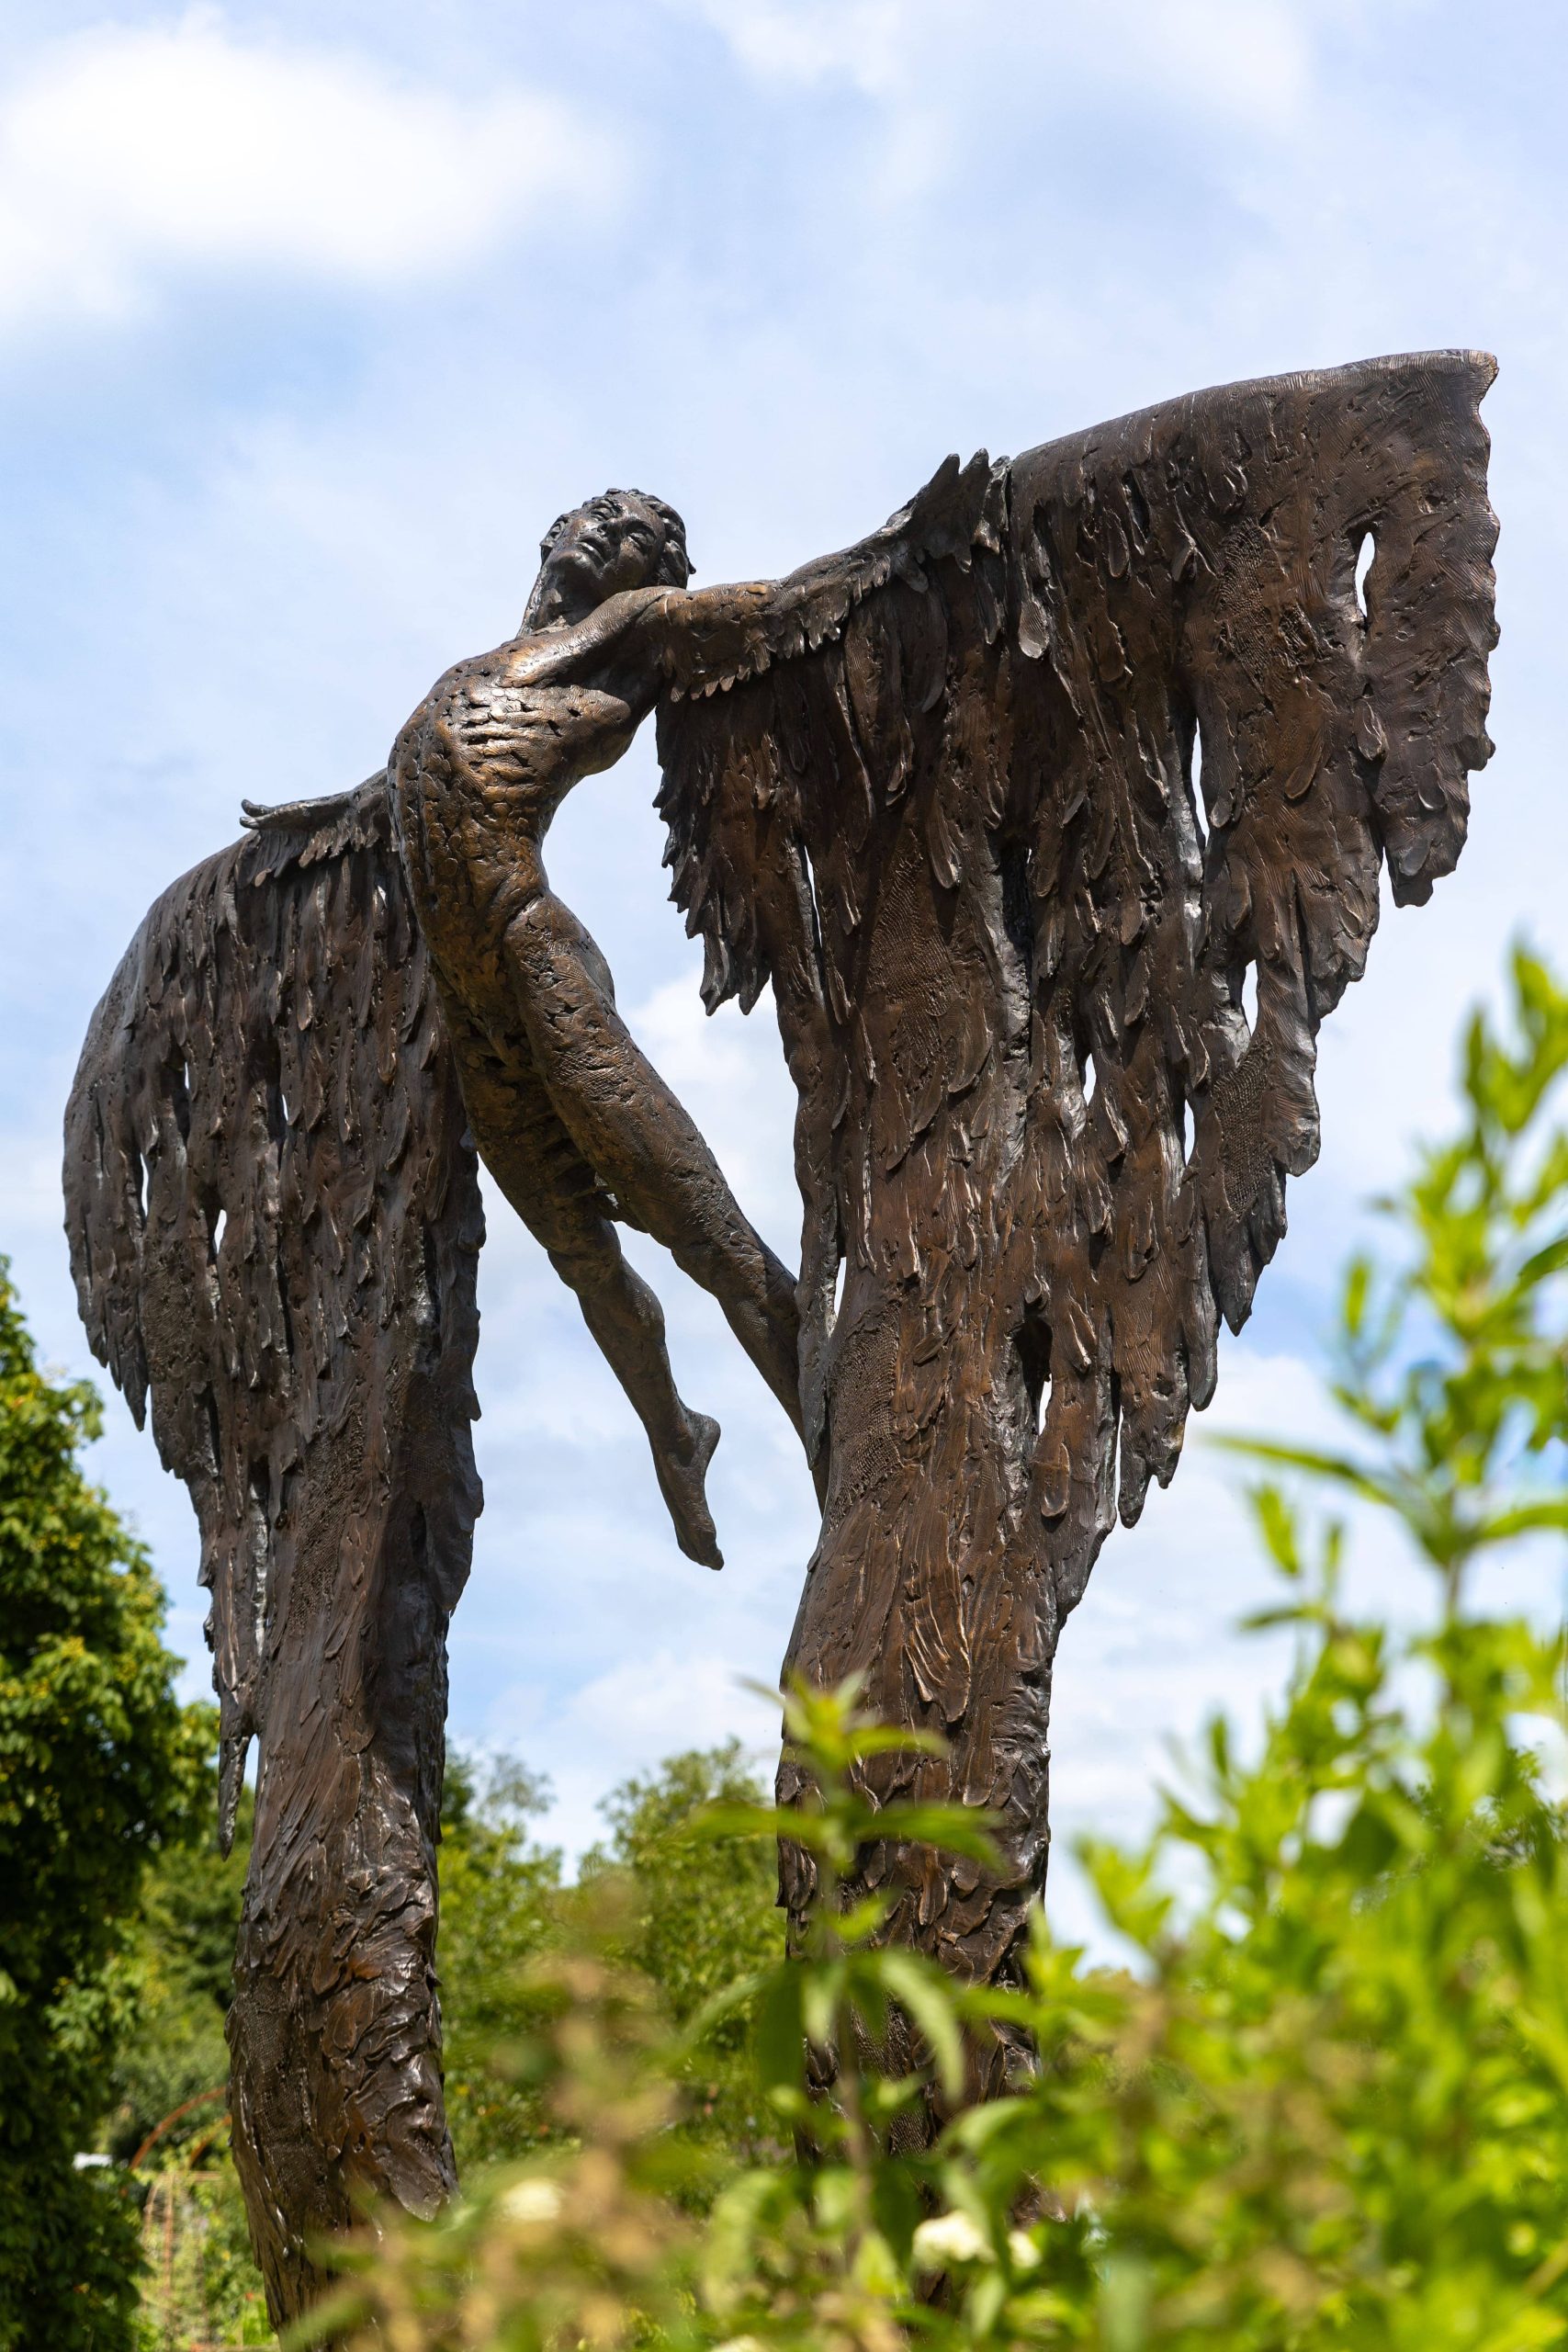 Dorset sculpture park has large garden sculpture of Icarus that can be walked under.